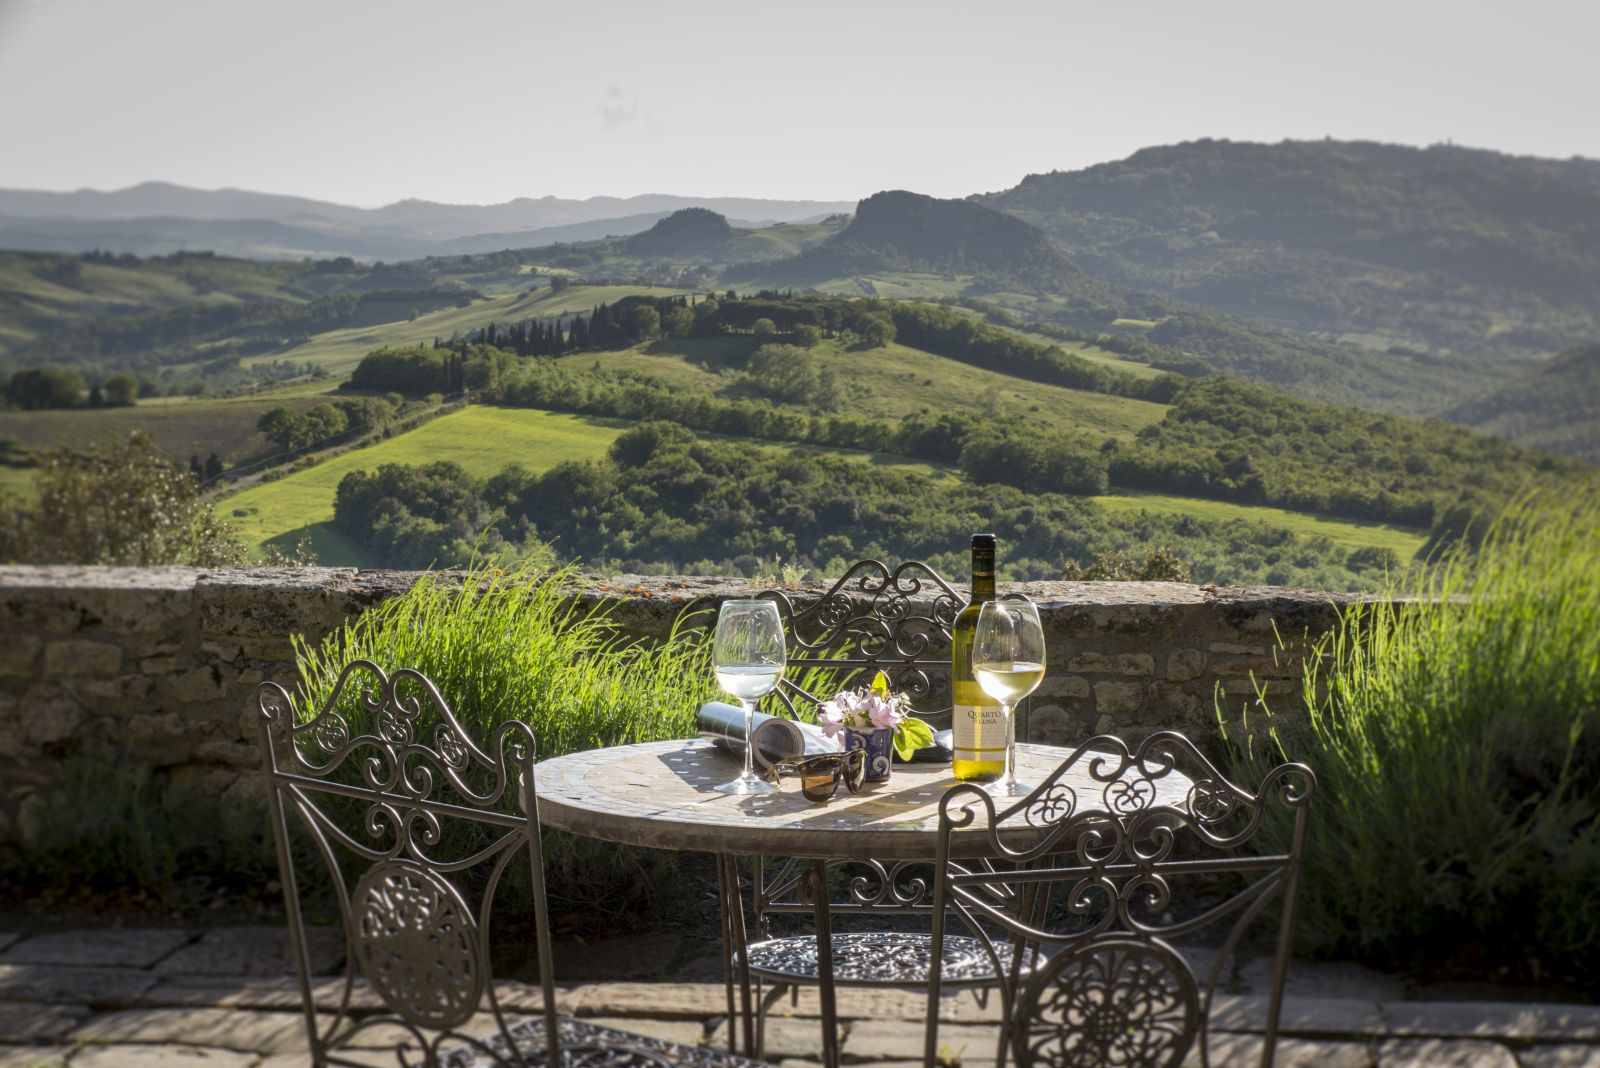 Views of the Tuscan hills from the terrace at Borgo Pignano in Italy